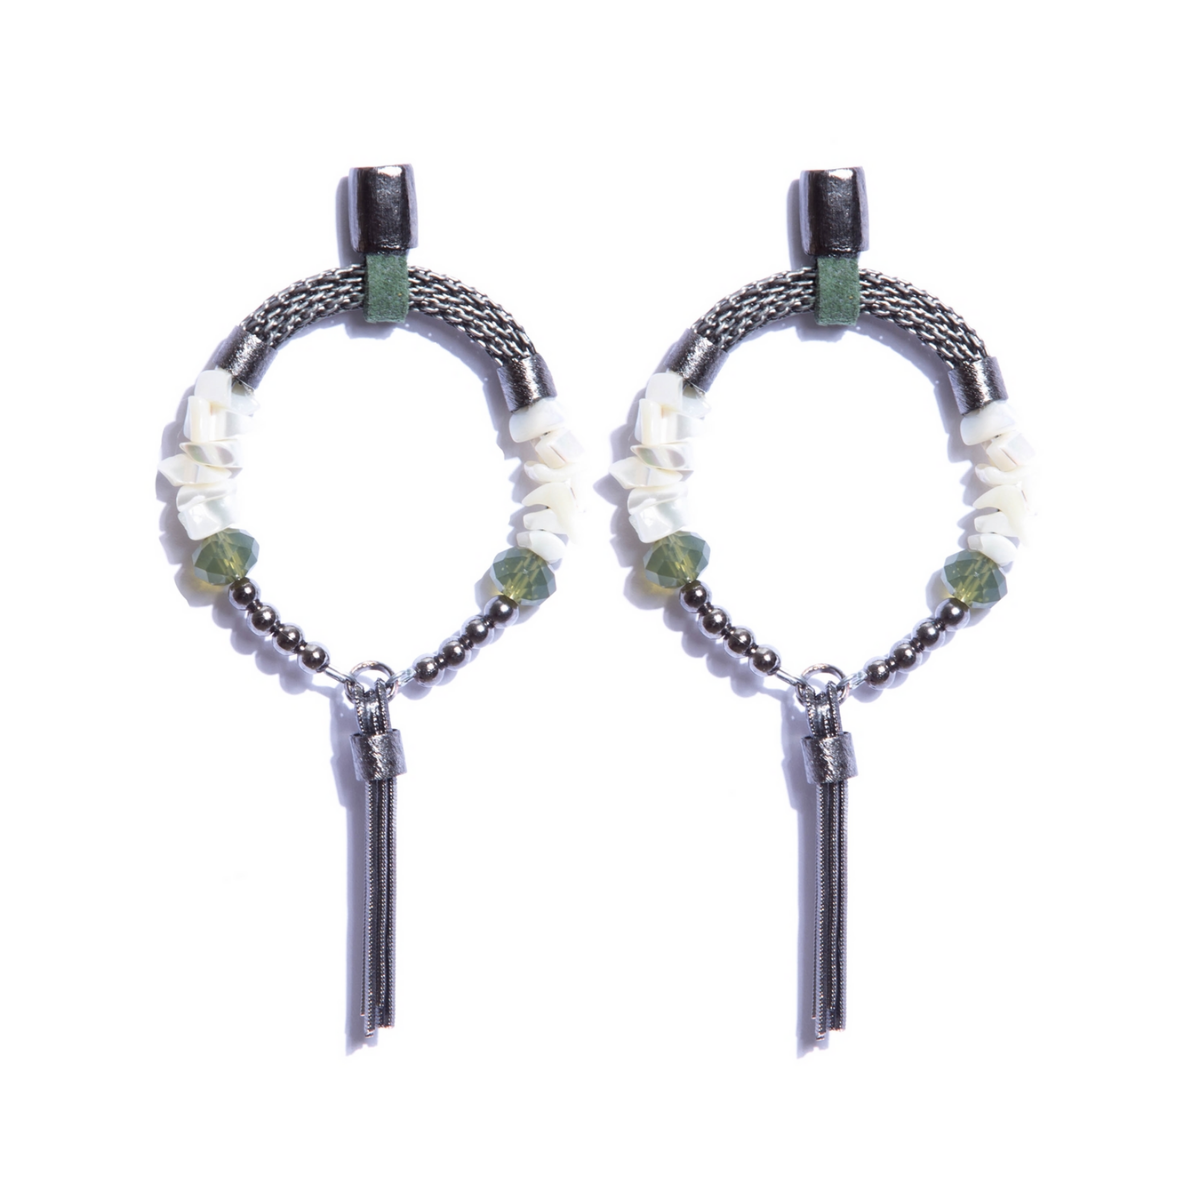 Mother of Pearl Graphite-Plated Earrings with Green Crystals and Aluminum Mesh